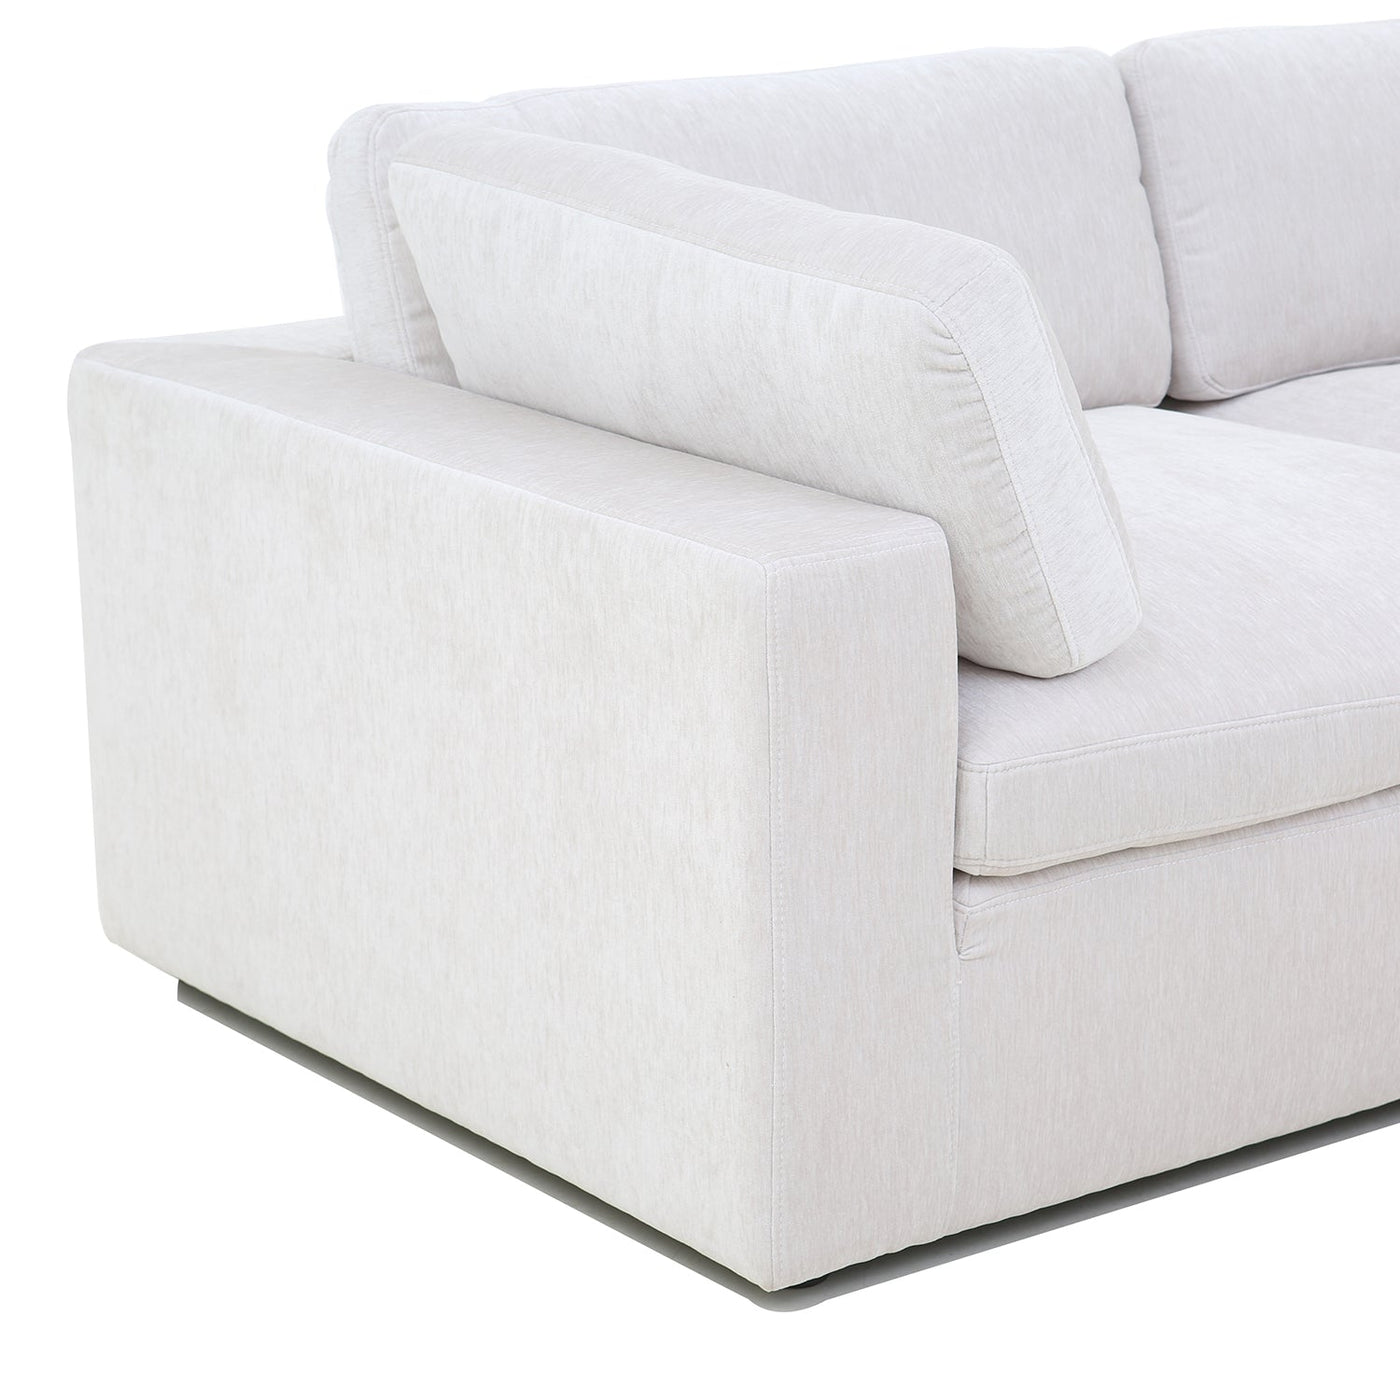 Zephyr Right-Sectional